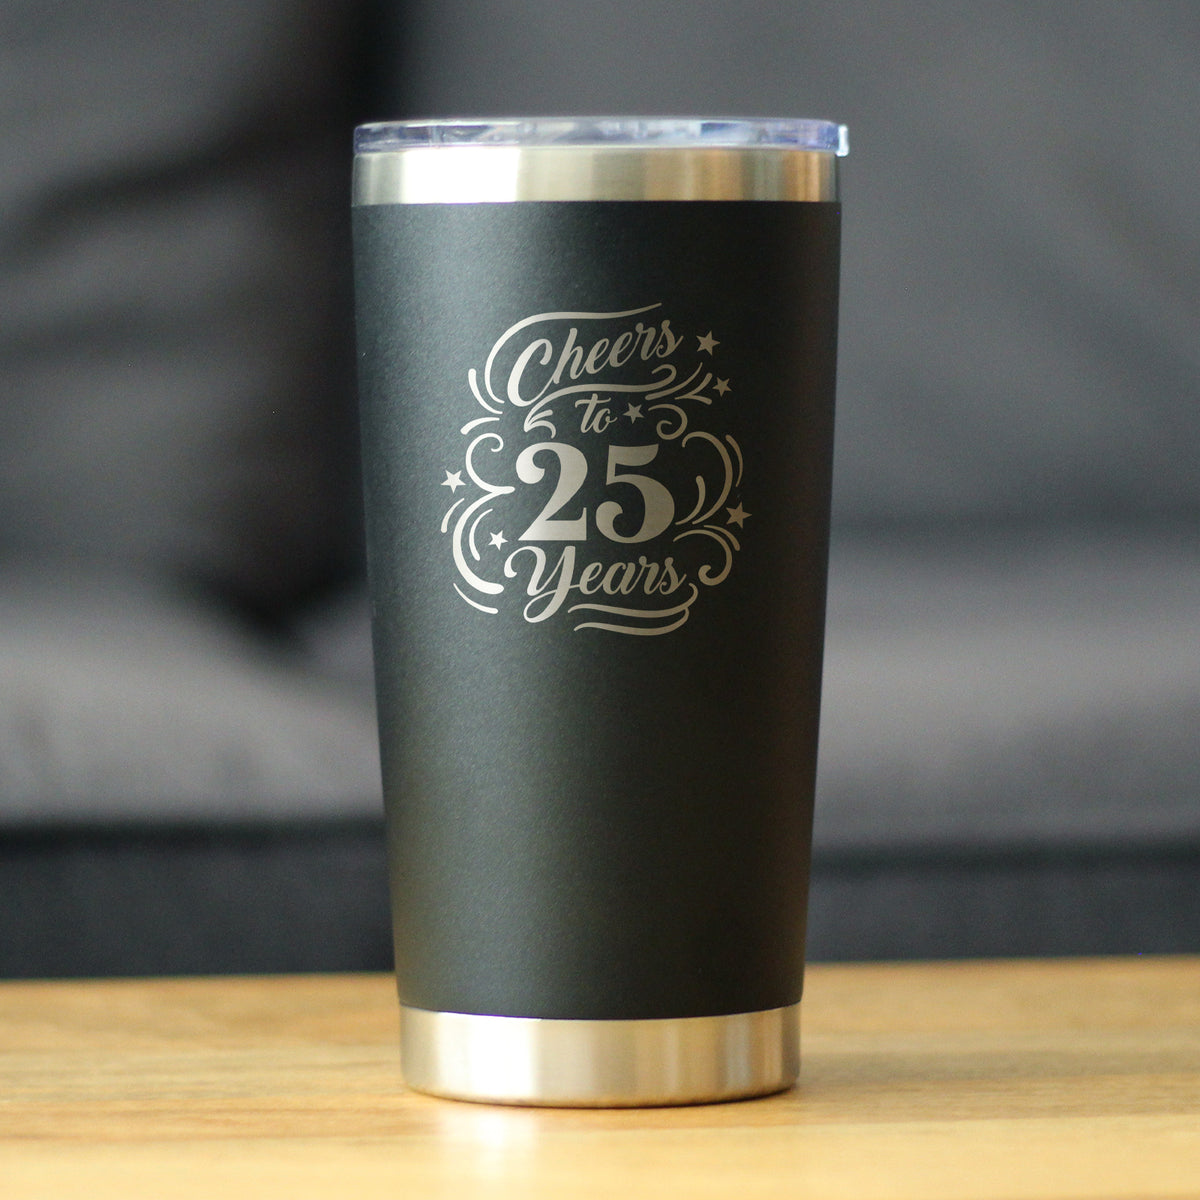 Cheers to 25 Years - Insulated Coffee Tumbler Cup with Sliding Lid - Stainless Steel Insulated Mug - 25th Anniversary Gifts and Party Decor